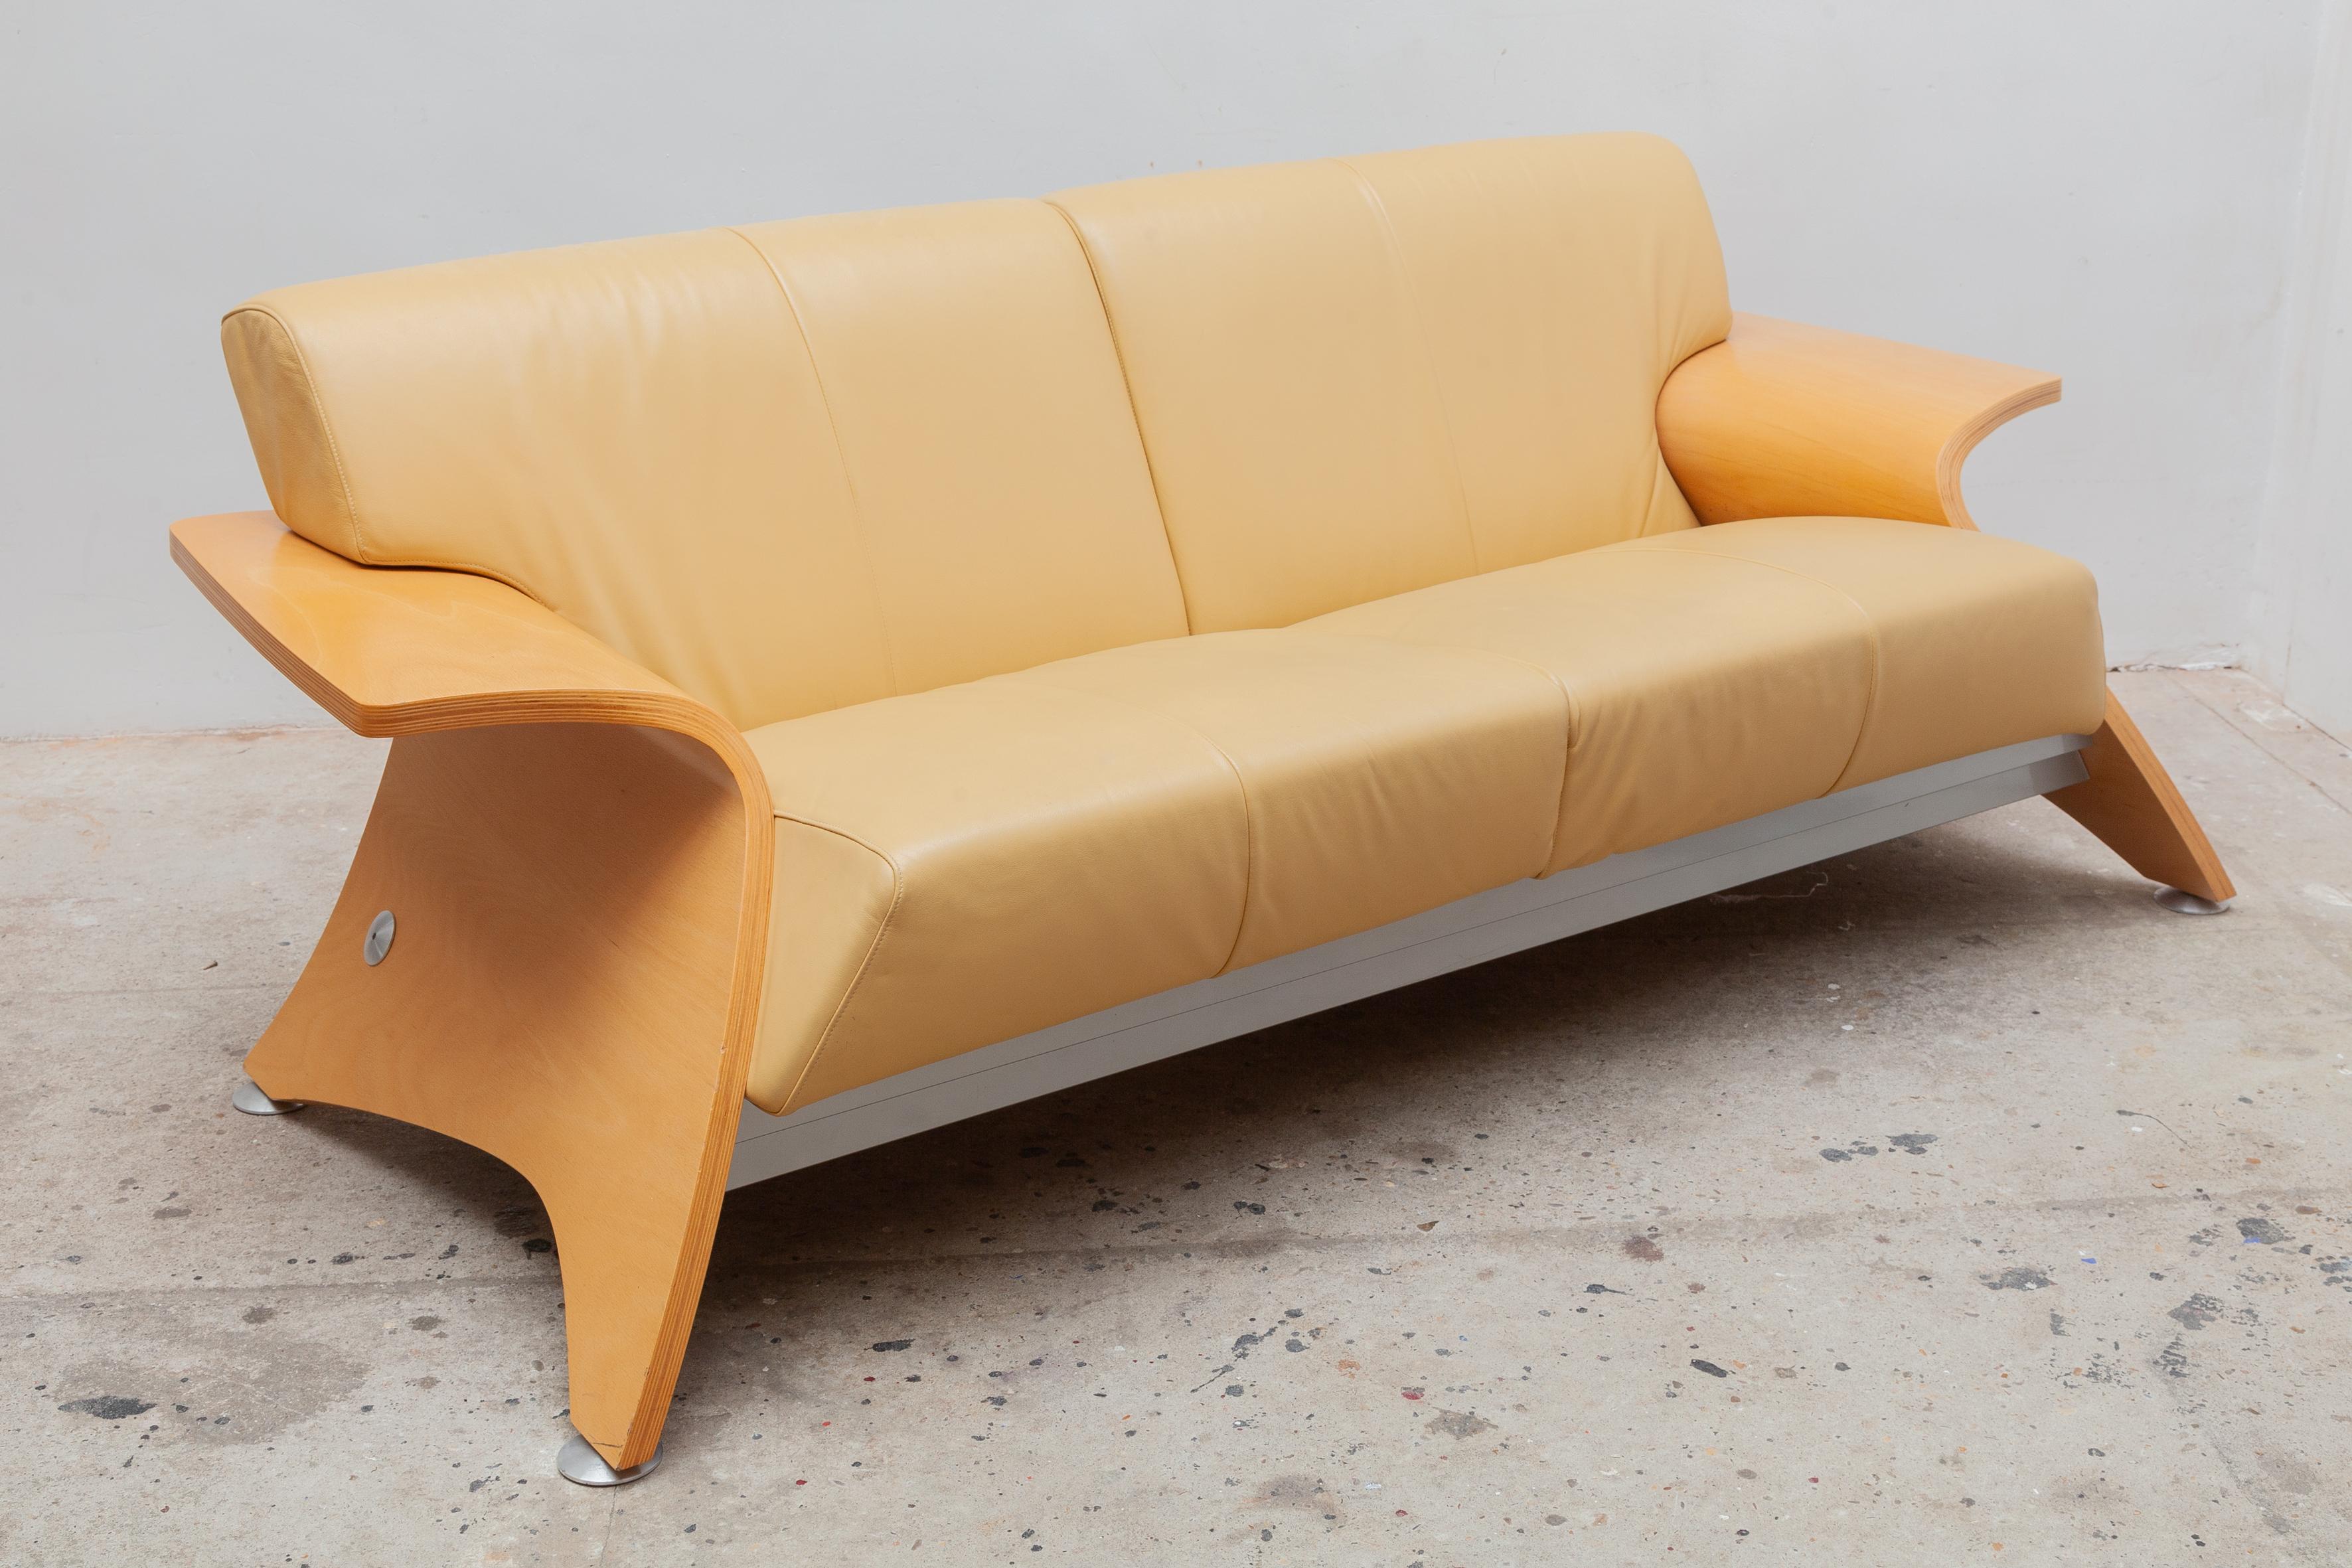 Vintage 1980s Postmodern two-seat sofa. Sculpted beech frame with aluminum accents. Original warm yellow cream leather cushions. Very good condition, comfortable seat.

Dimensions: 180 W x 70 H x 95 D cm, seat 40cm high.